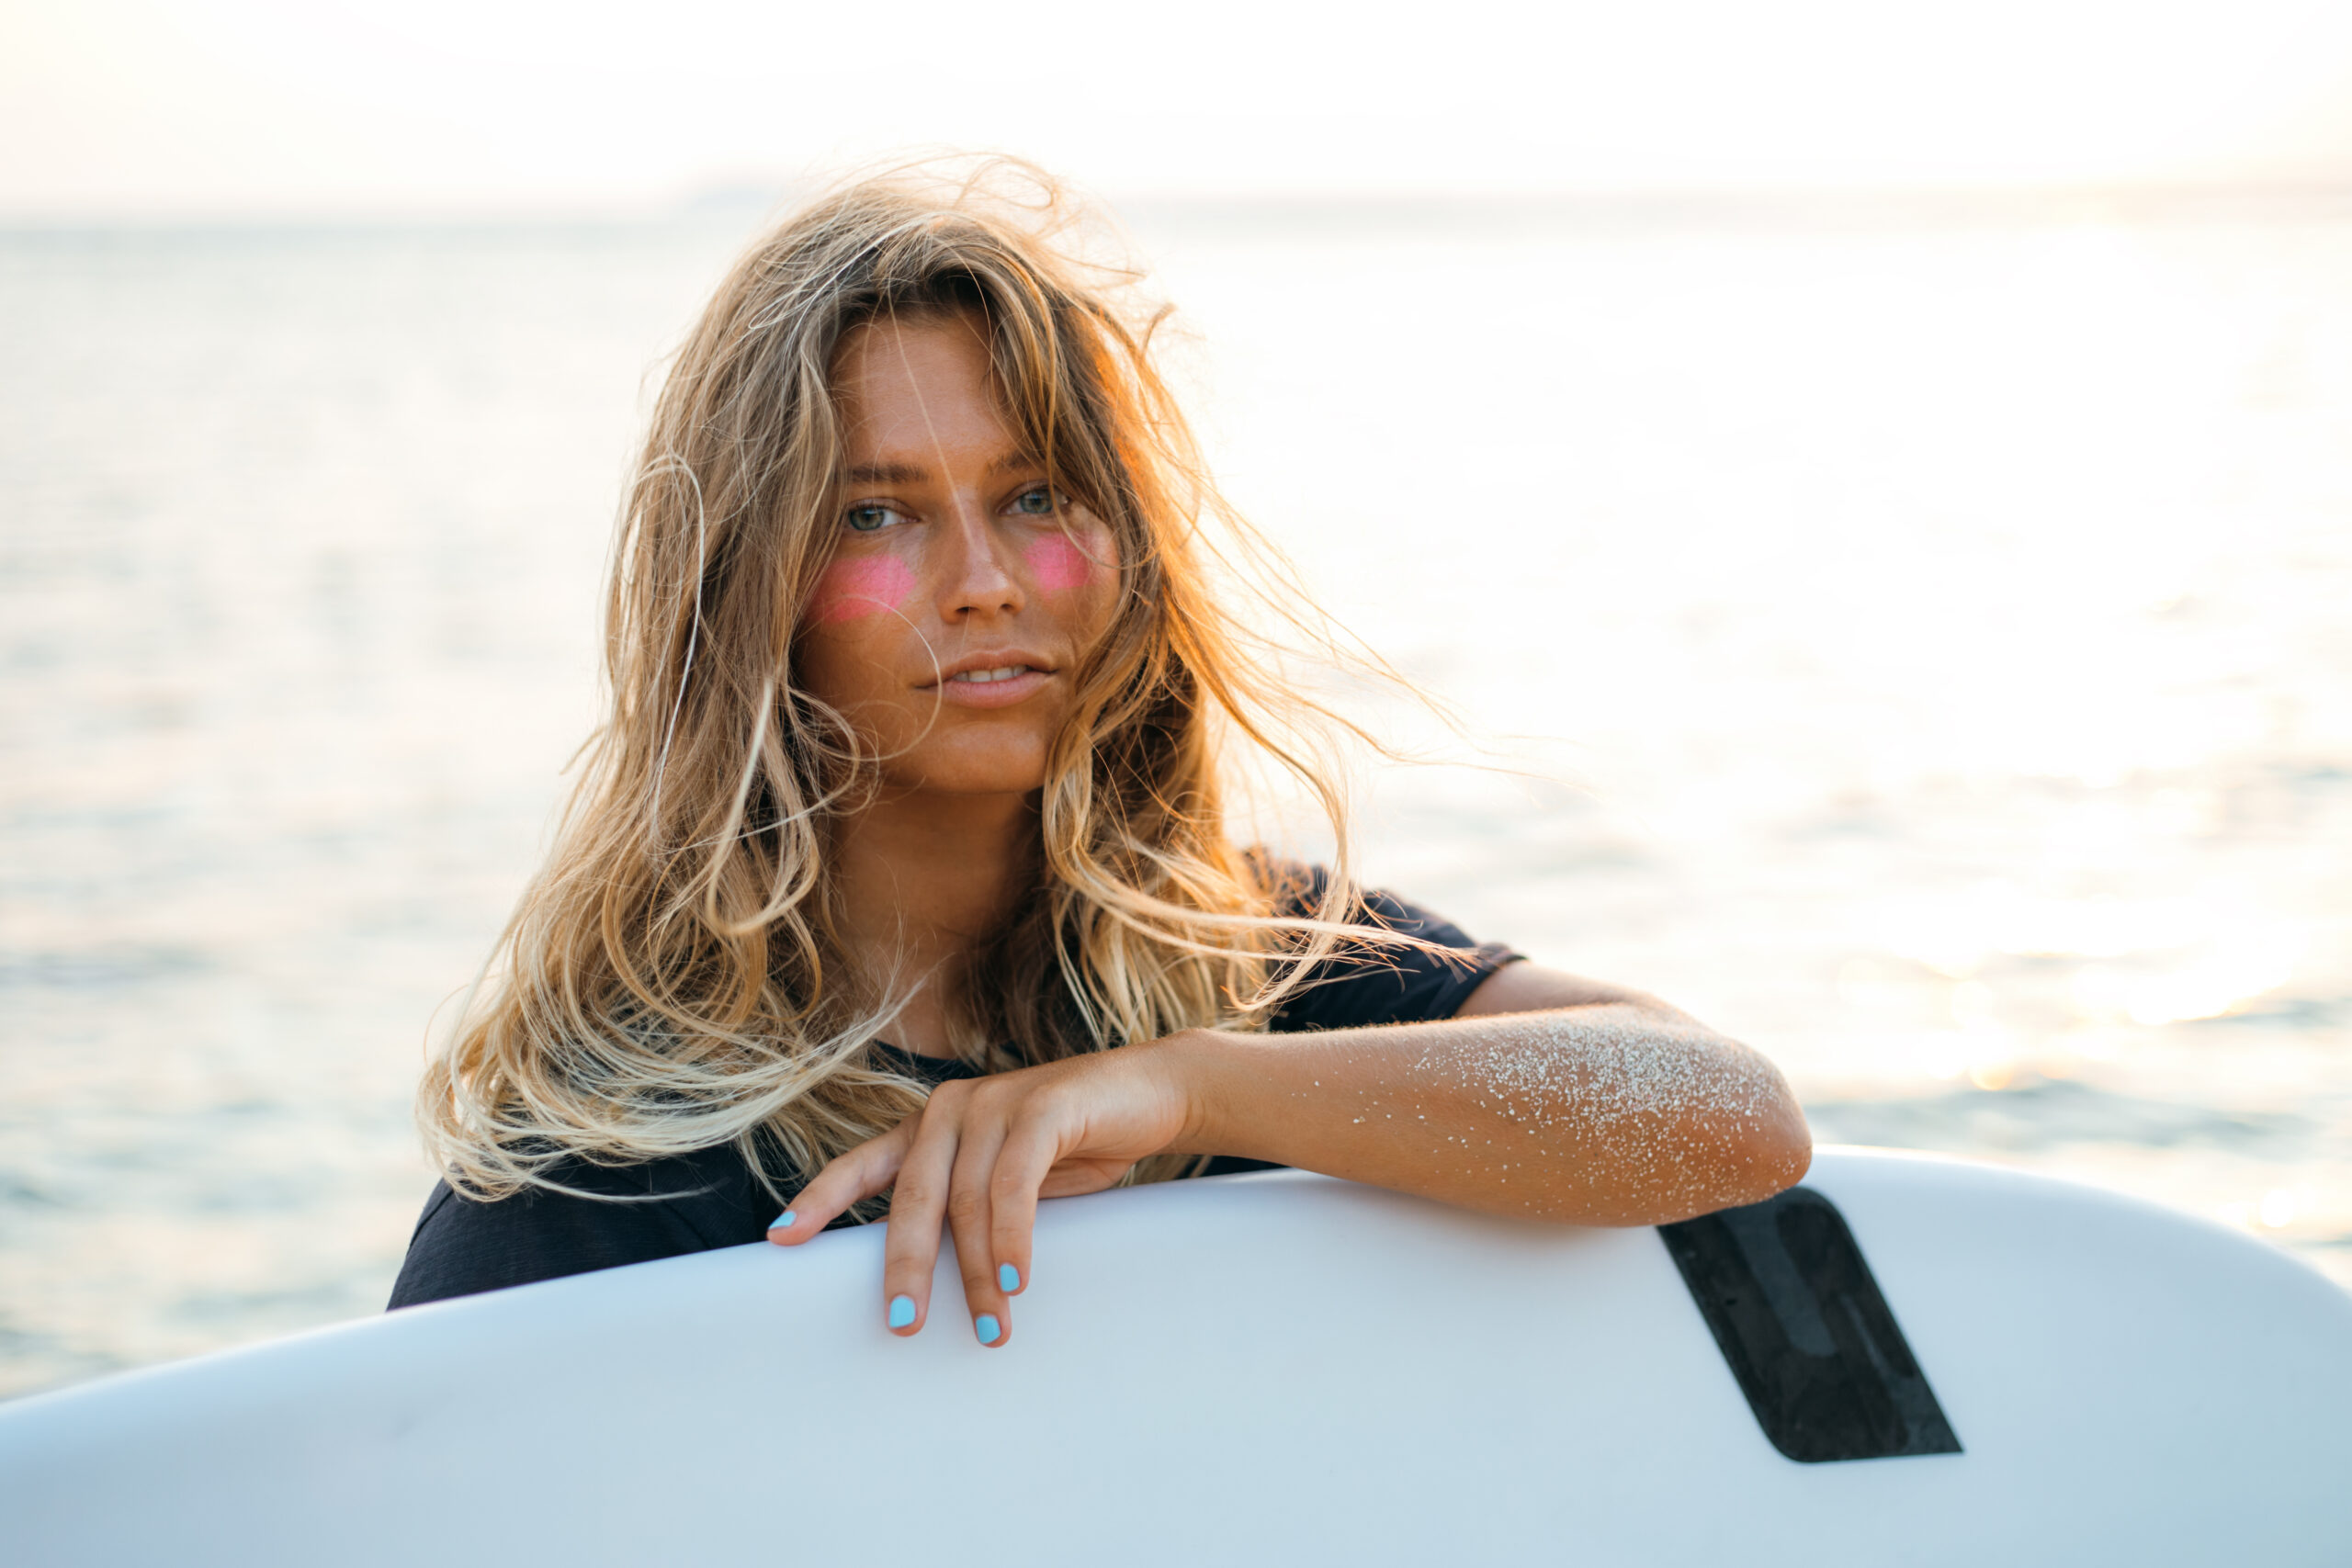 GIRL WITH SURF BOARD